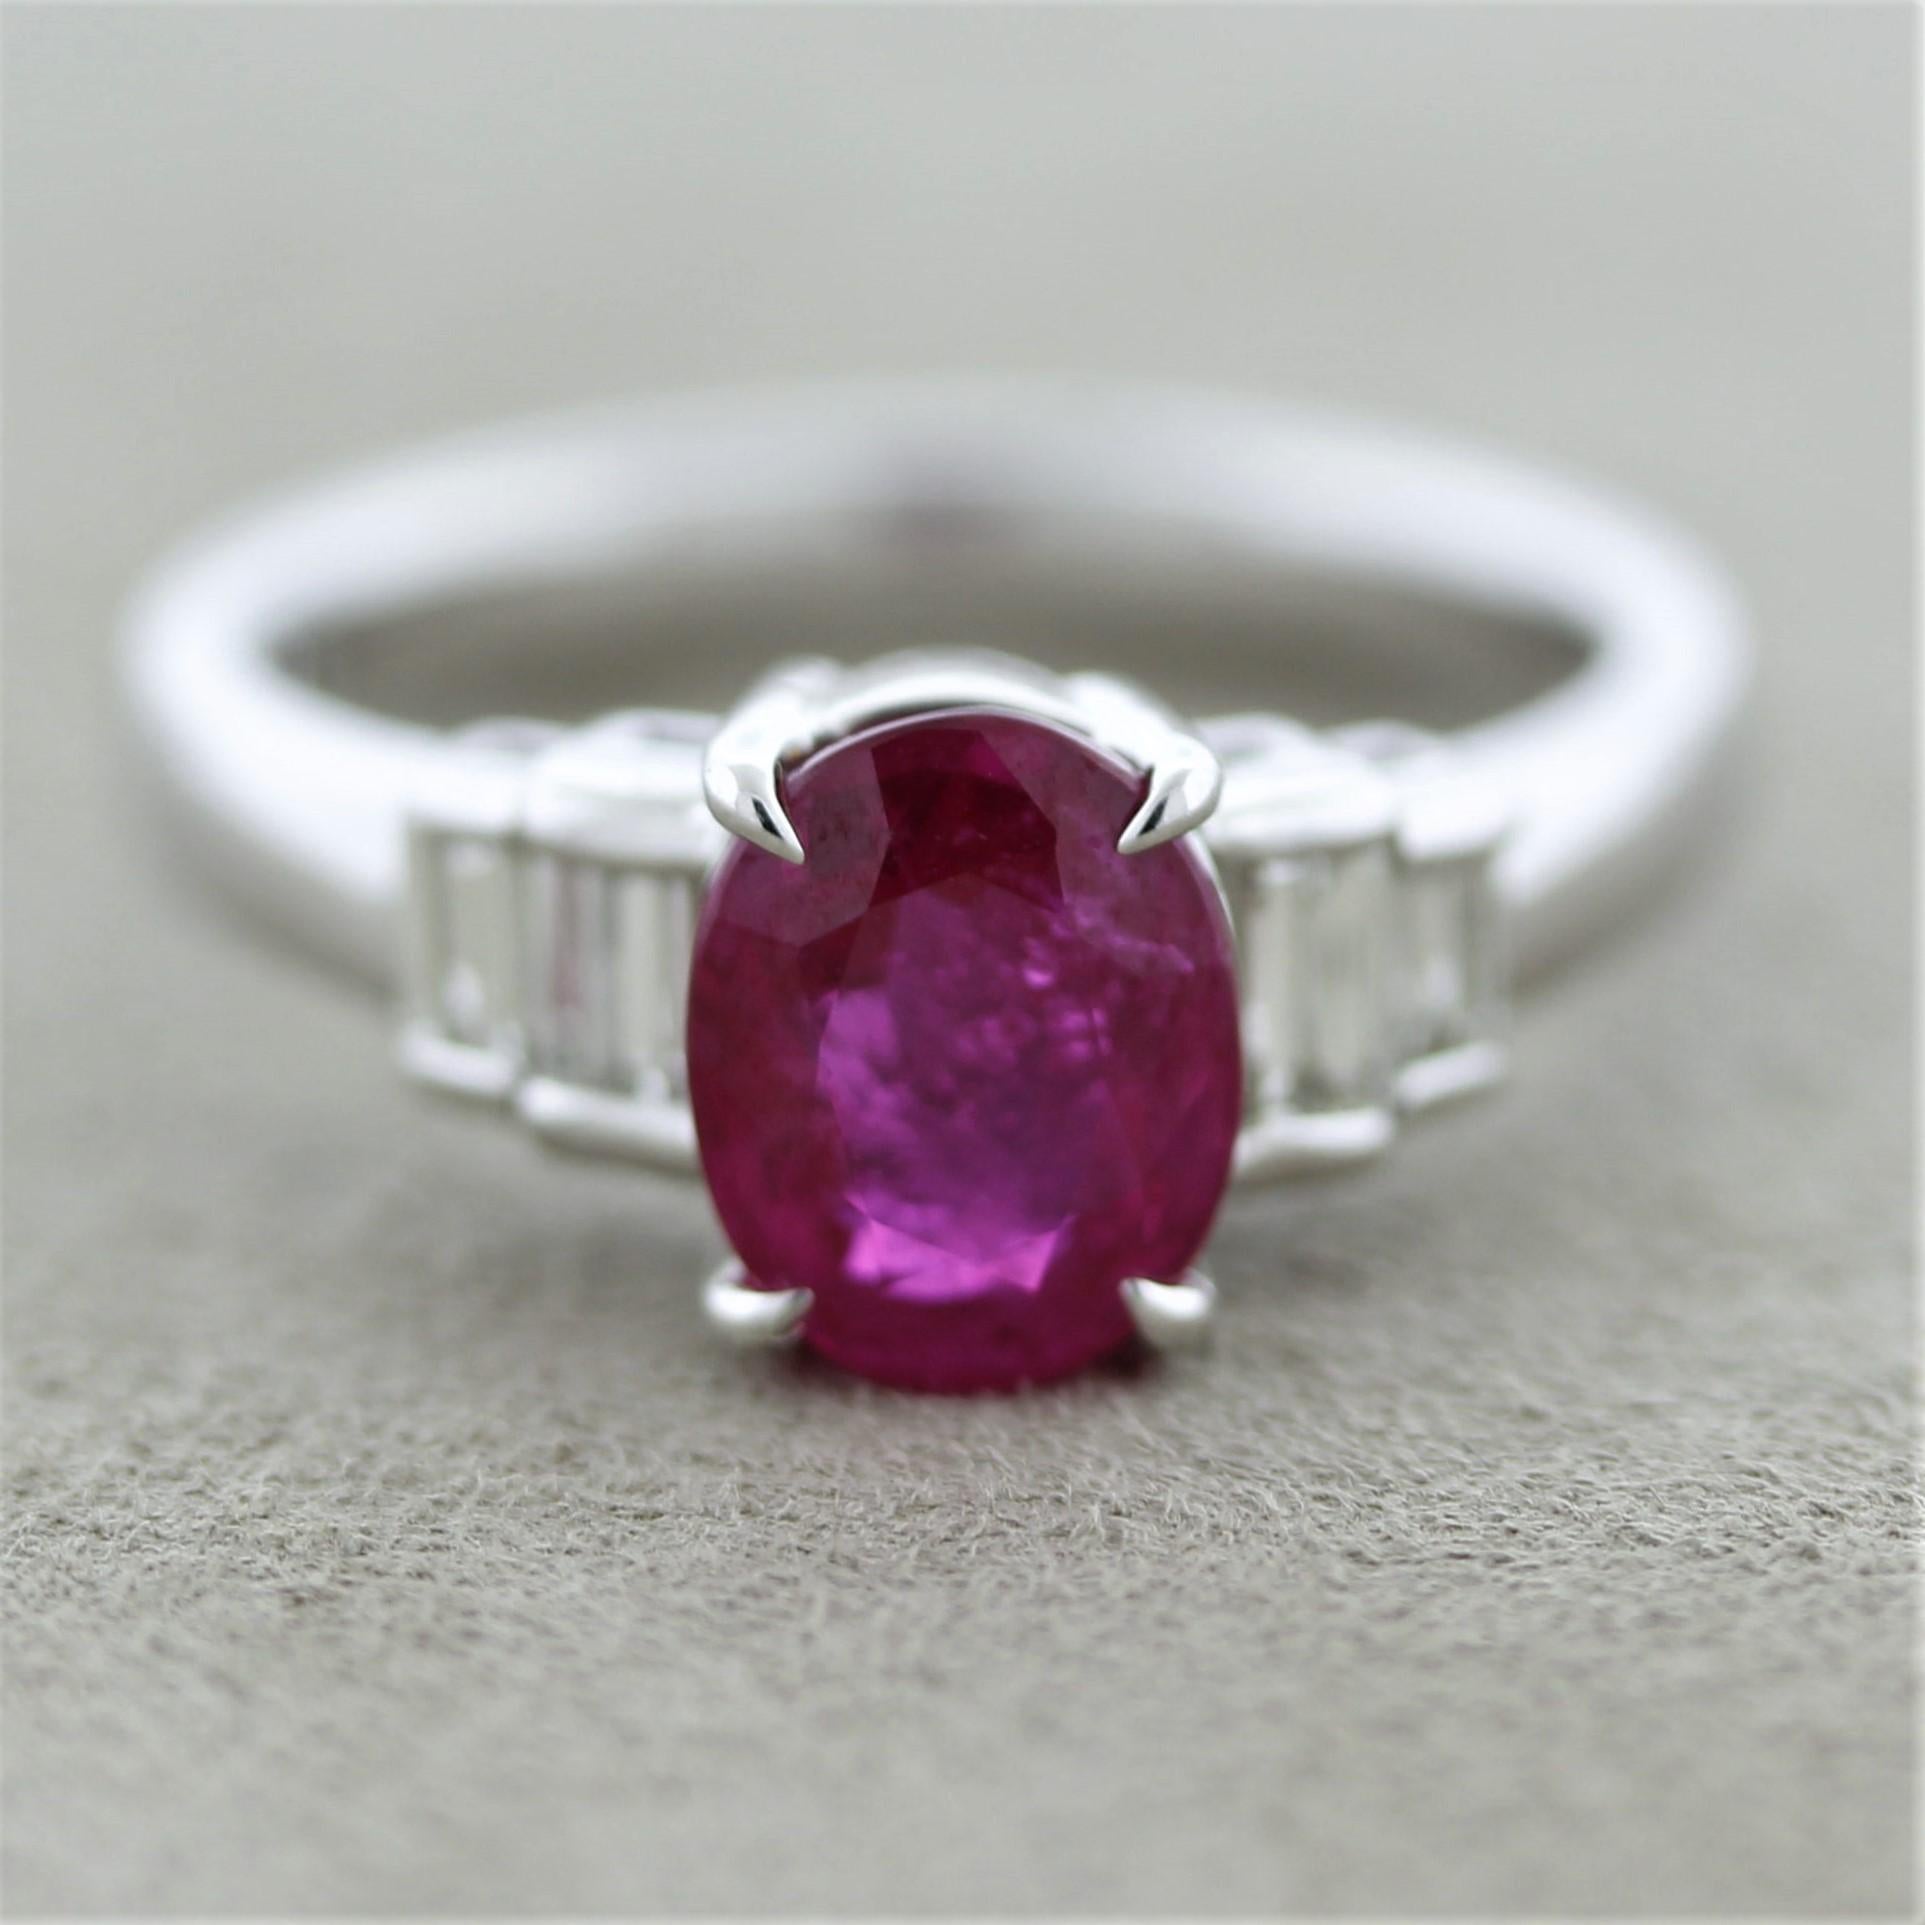 A lovely and classy platinum ring featuring a 2.02 carat natural Burmese ruby! It has a nice oval-shape along with the classic slightly pinkish-red intense color with excellent brilliance and sparkle. It is accented by baguette-cut diamonds set on